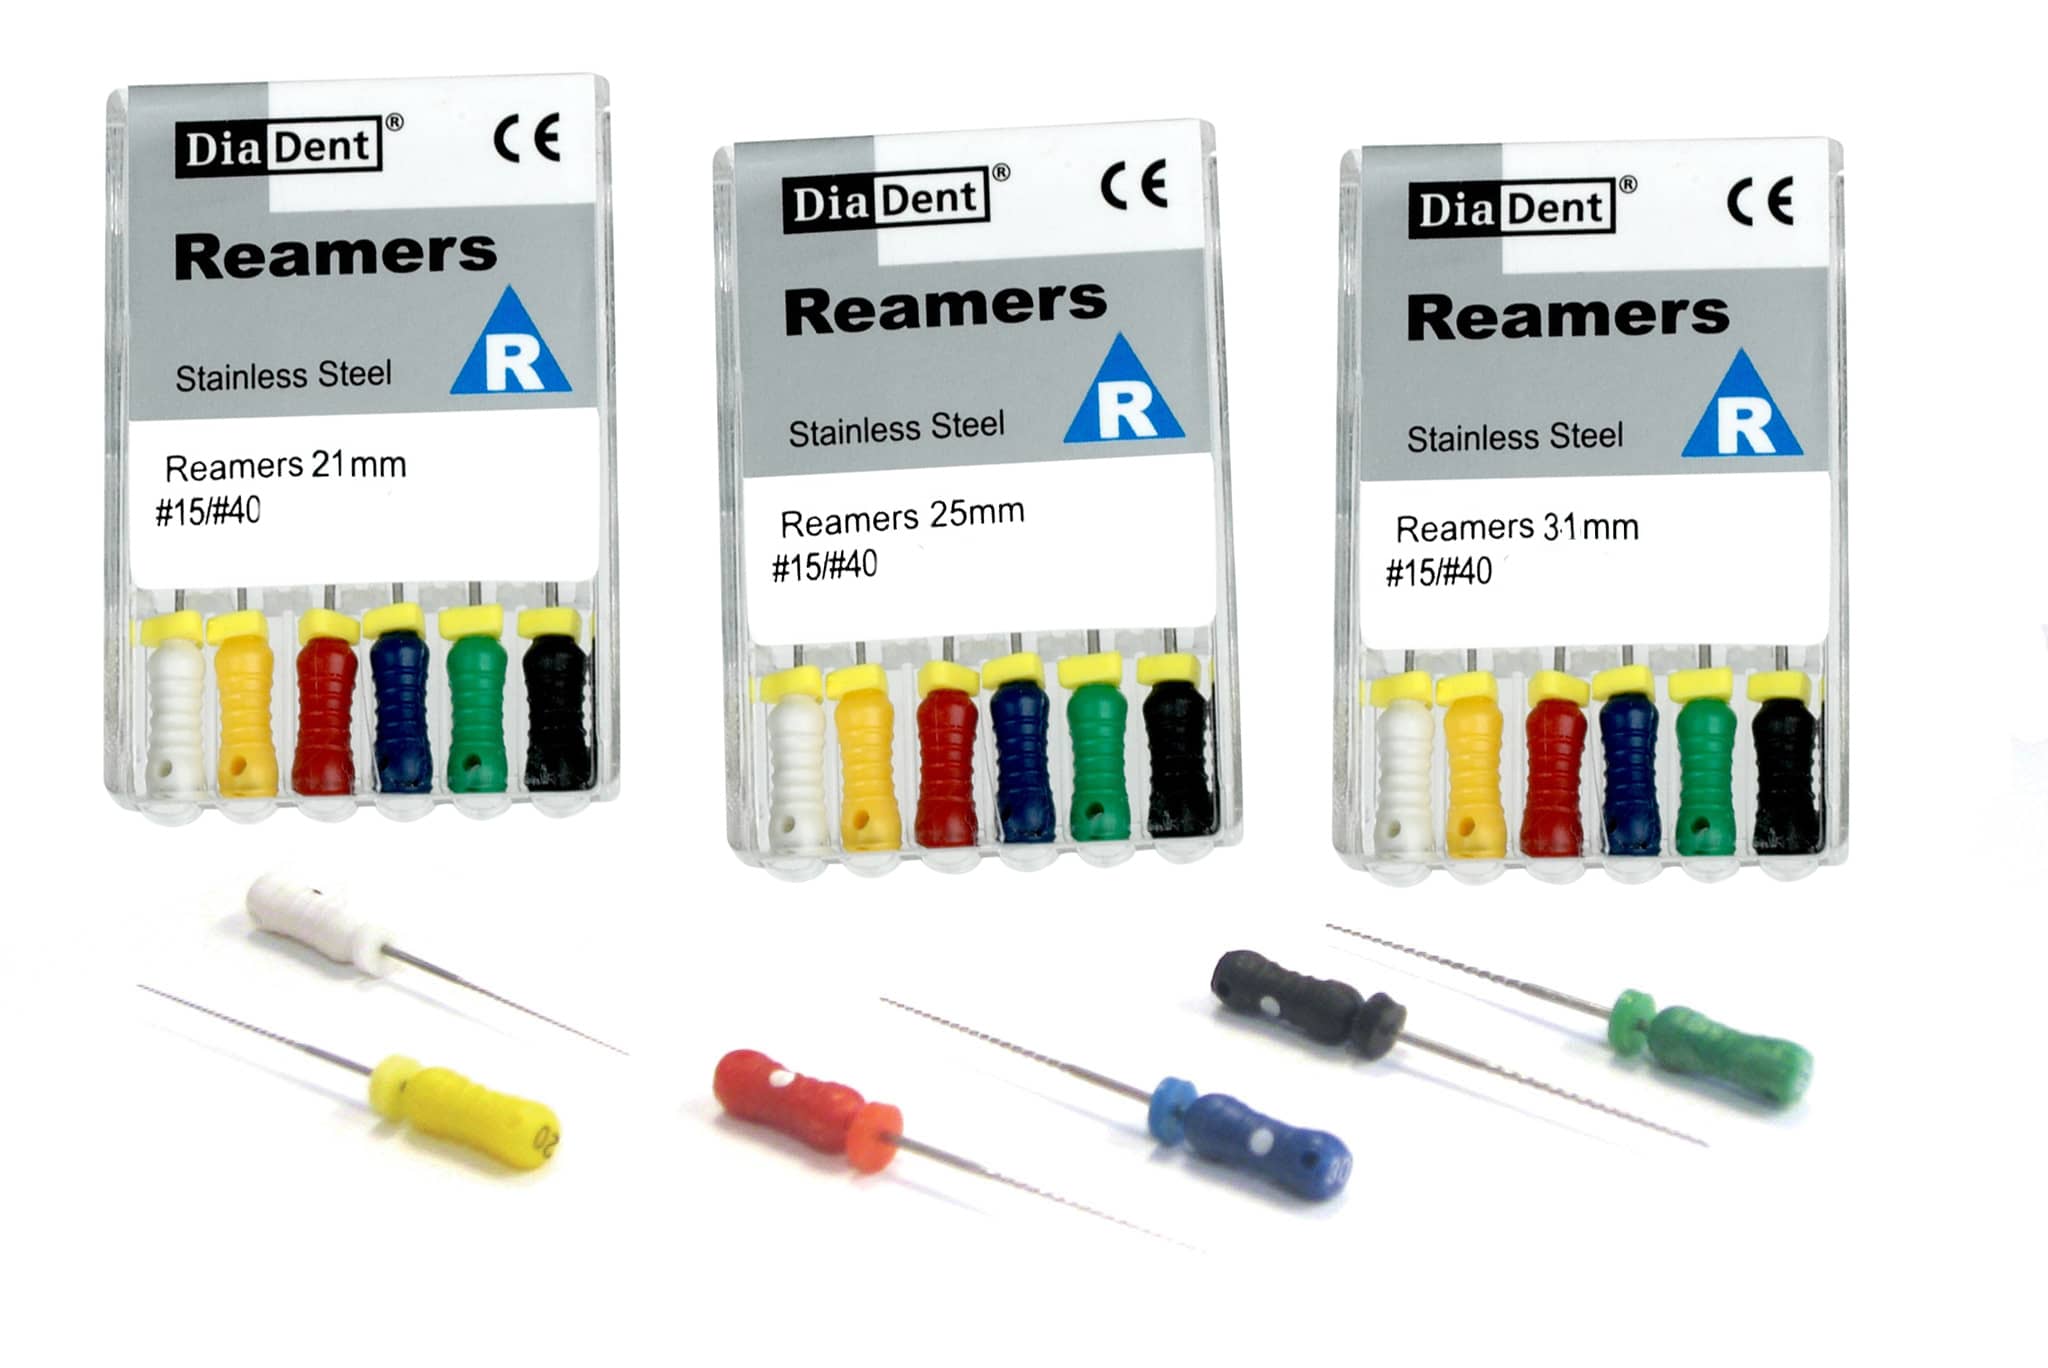 REAMERS Diadent 25mm - 15/40